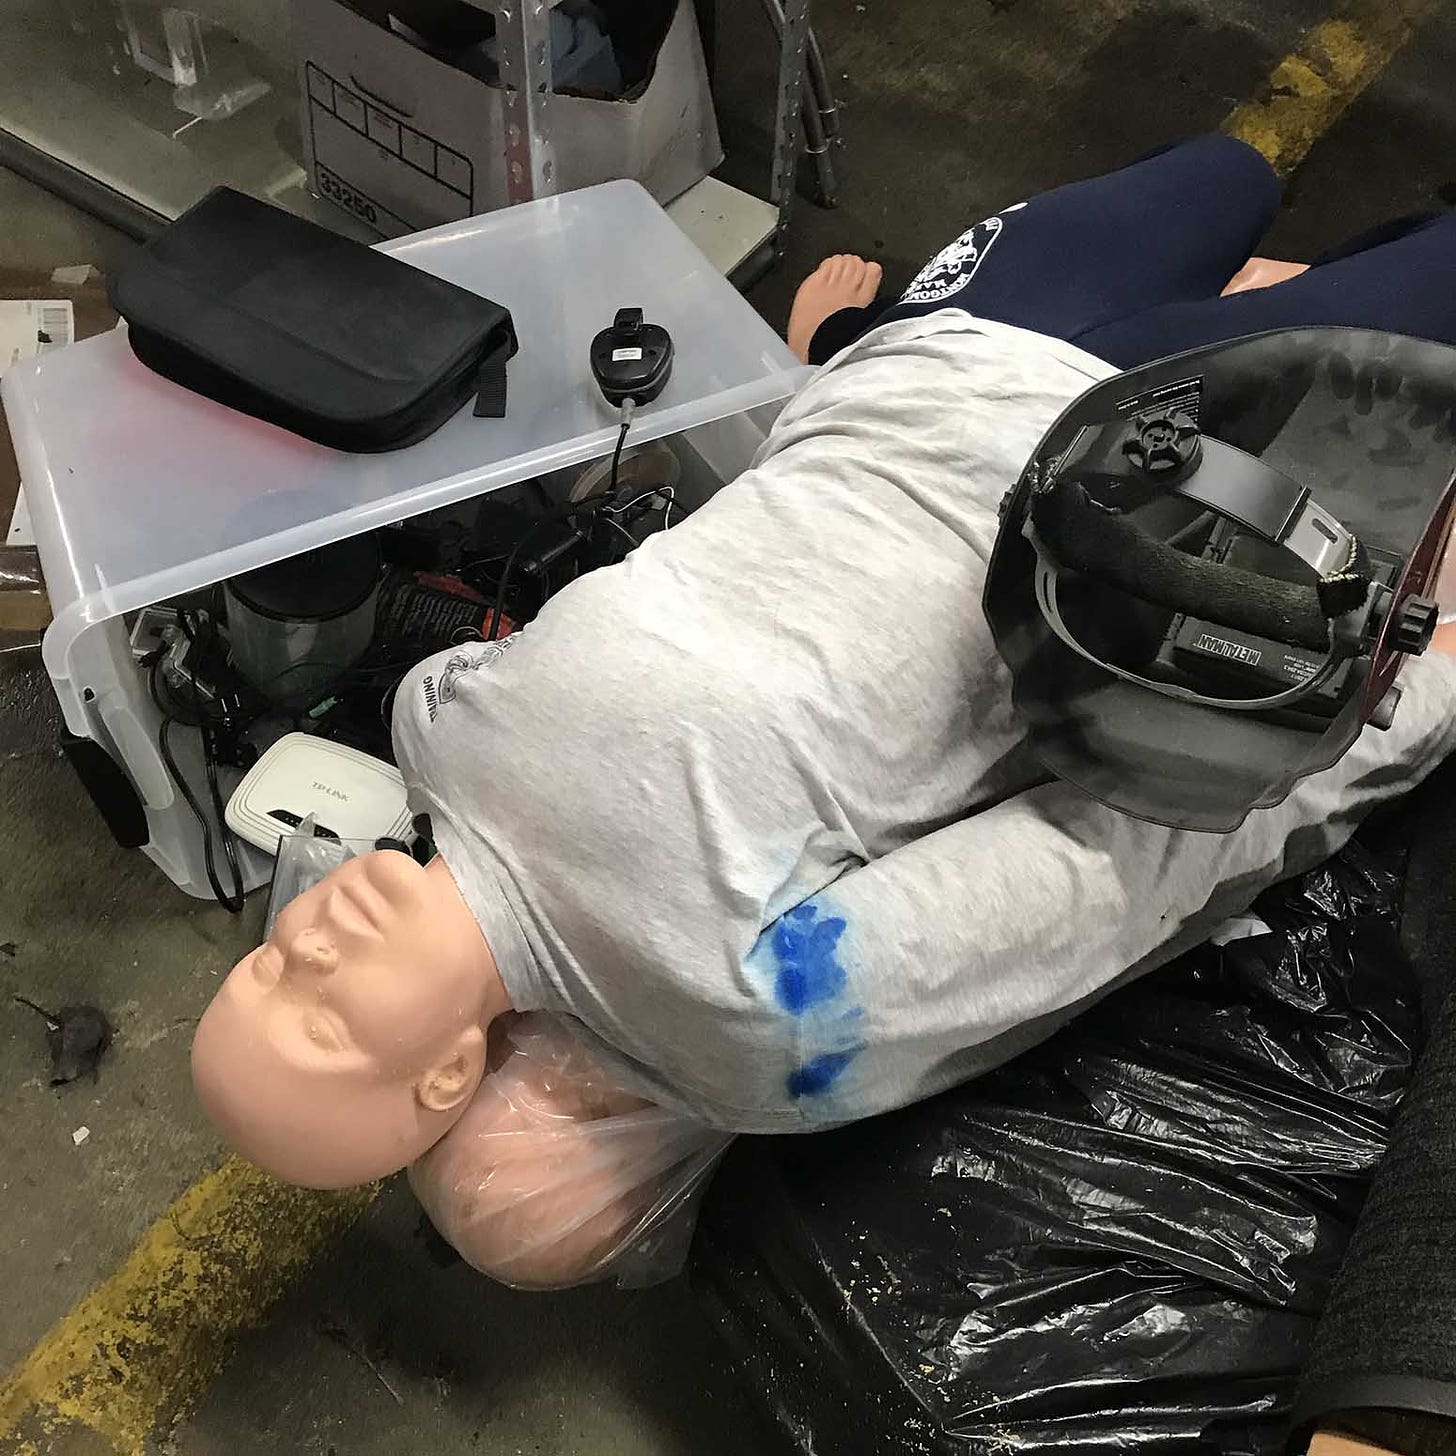 A photo of a dummy used for CPR training on the floor of a vacant medical testing facility